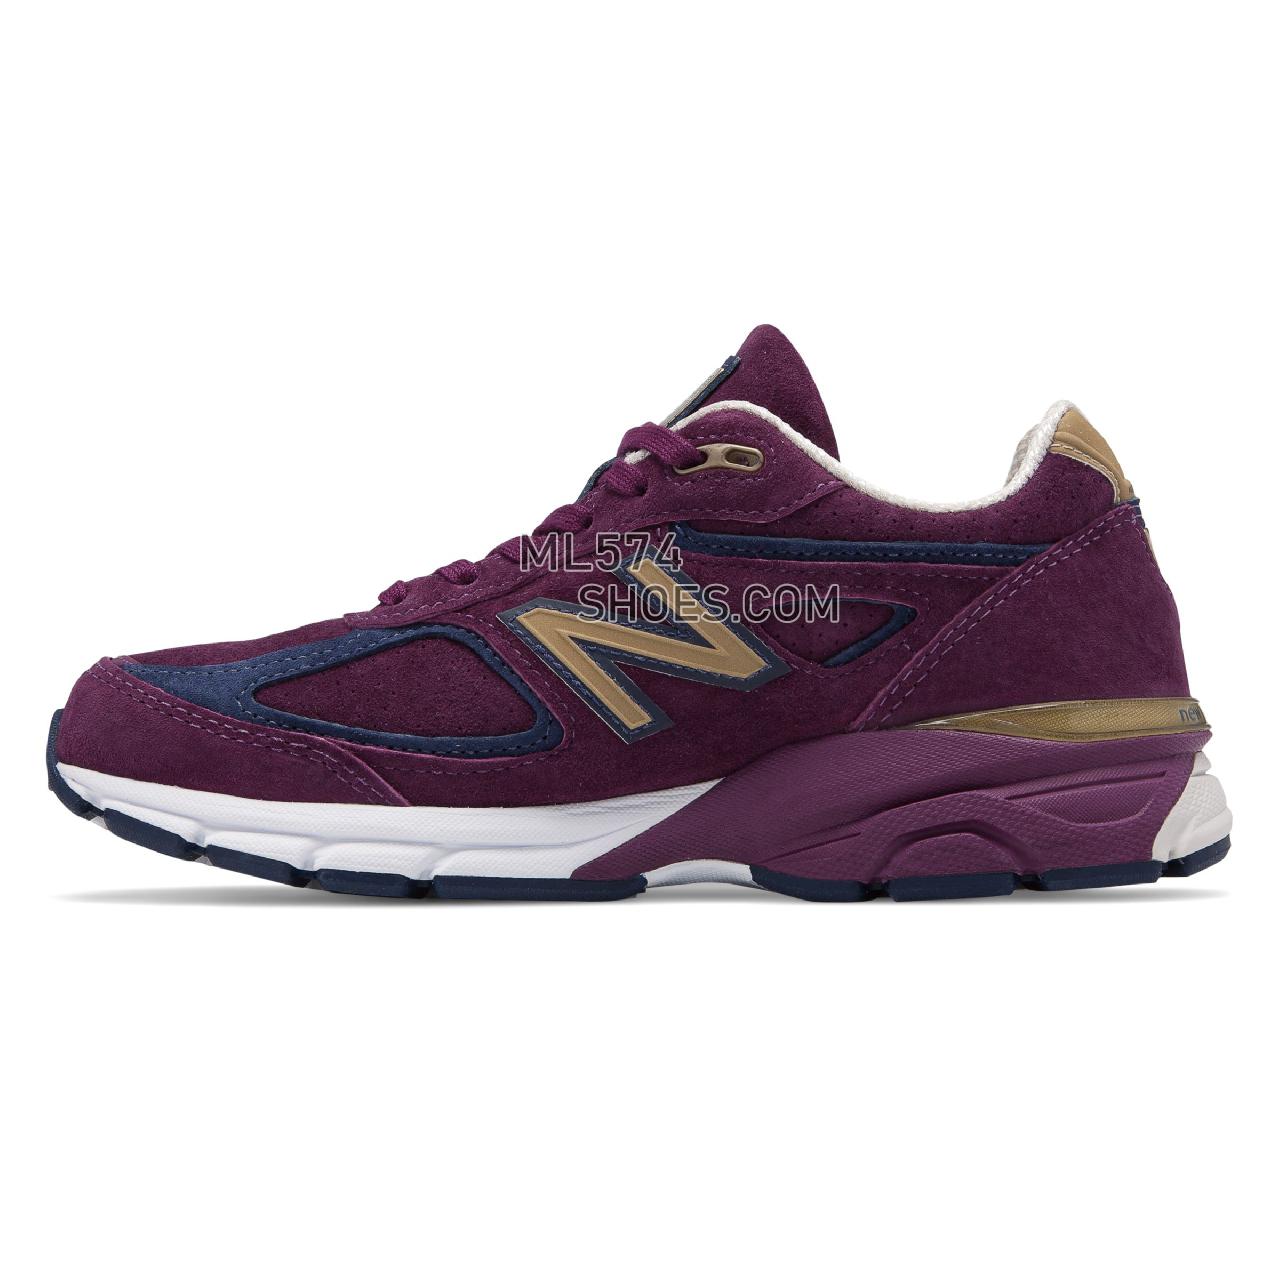 New Balance Made in US 990v4 - Men's 990v4 Made in US Running - Claret with Pigment - W990CP4